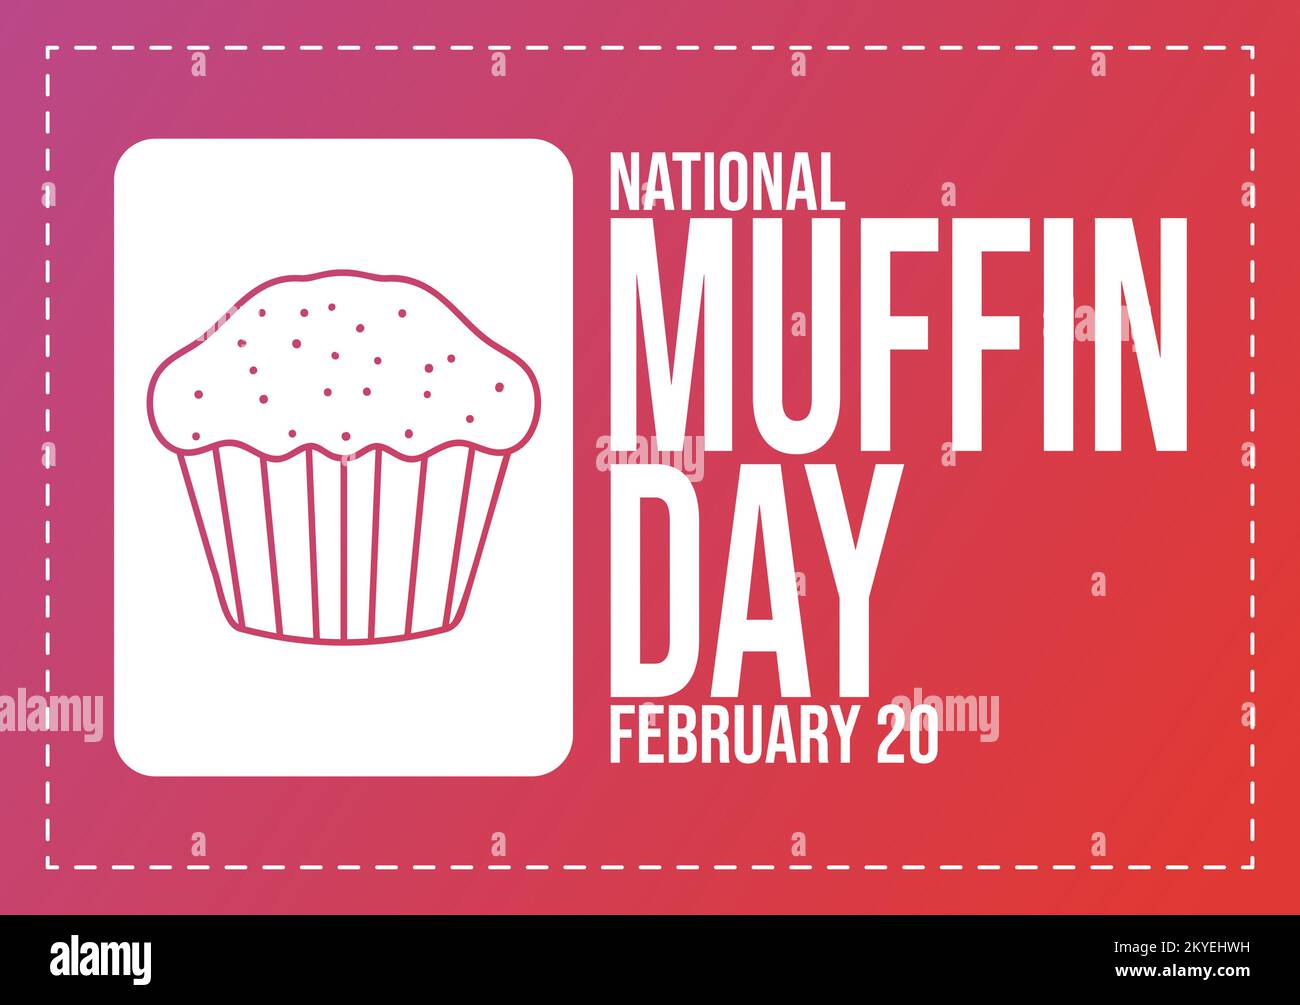 National Muffin Day on February 20th with Chocolate Chip Food Classic ...